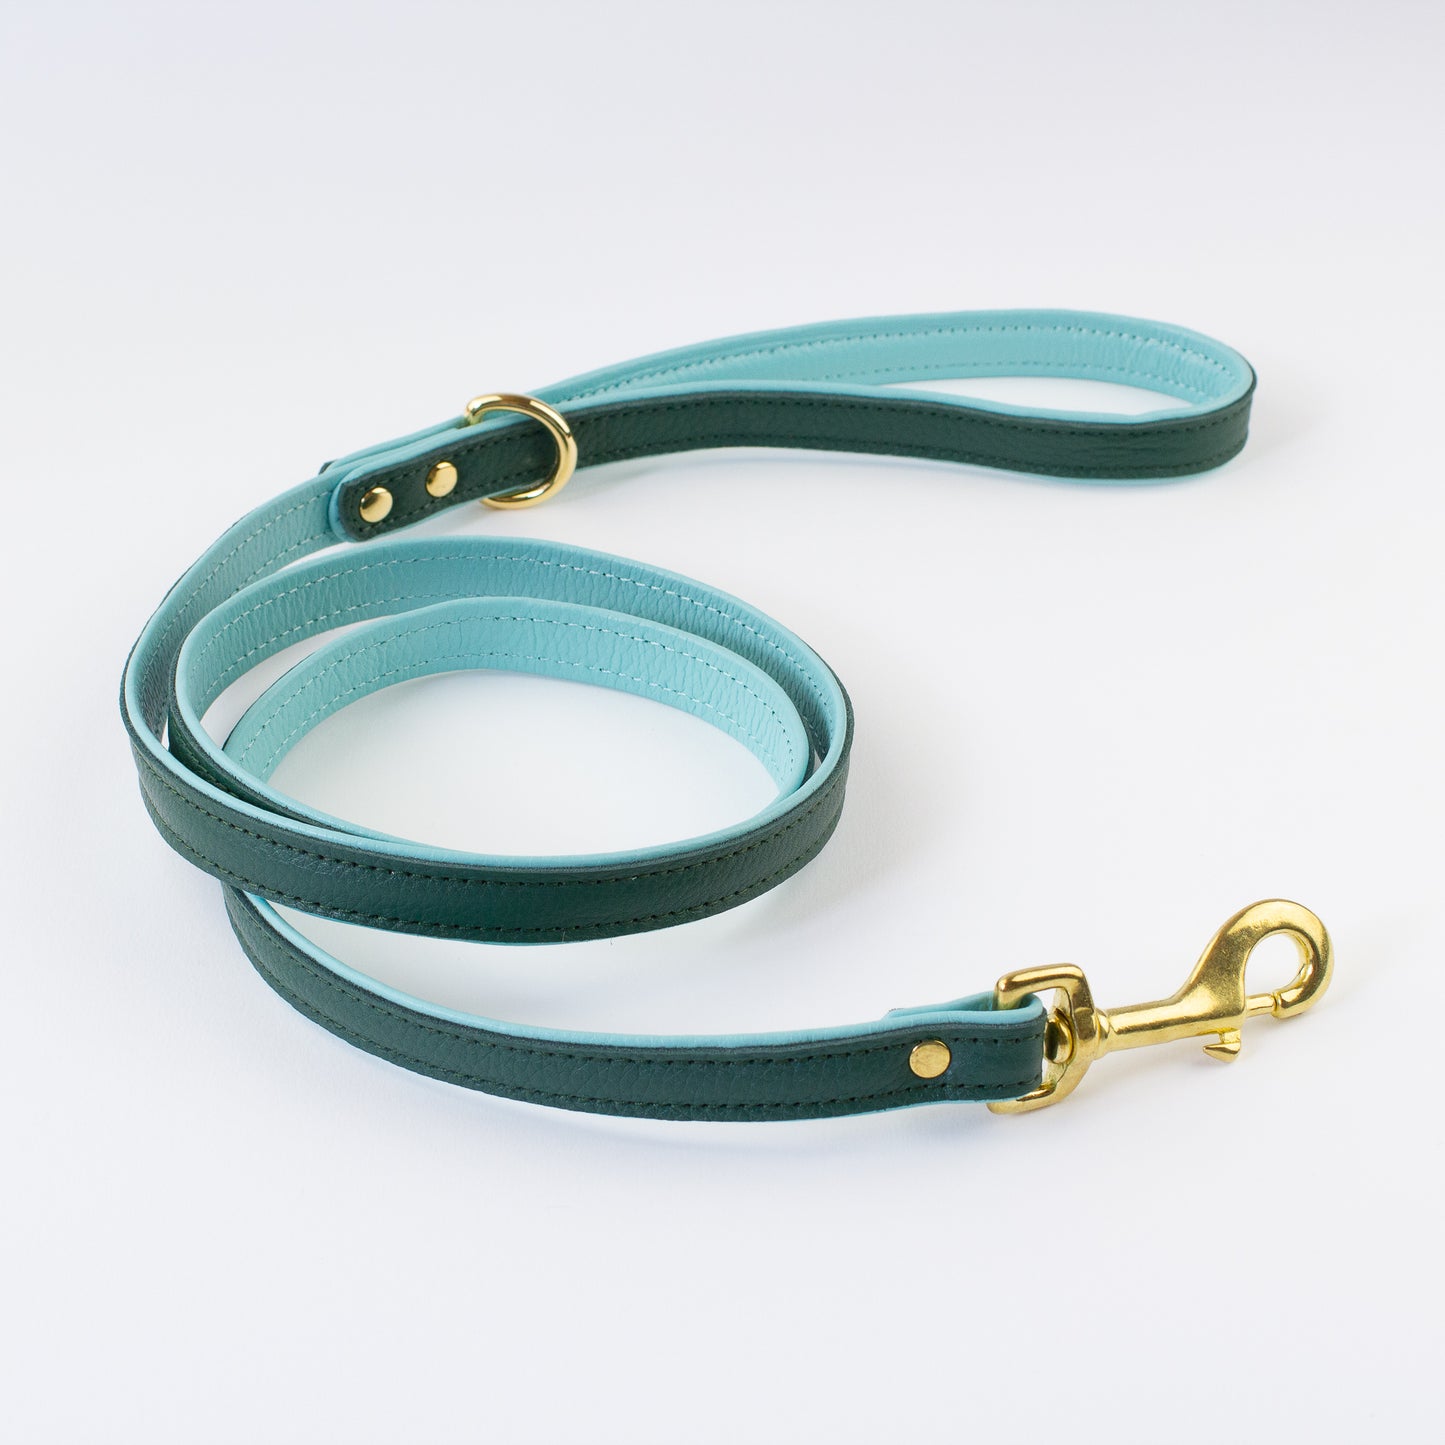 Double-sided dog leather lead Willow Walks